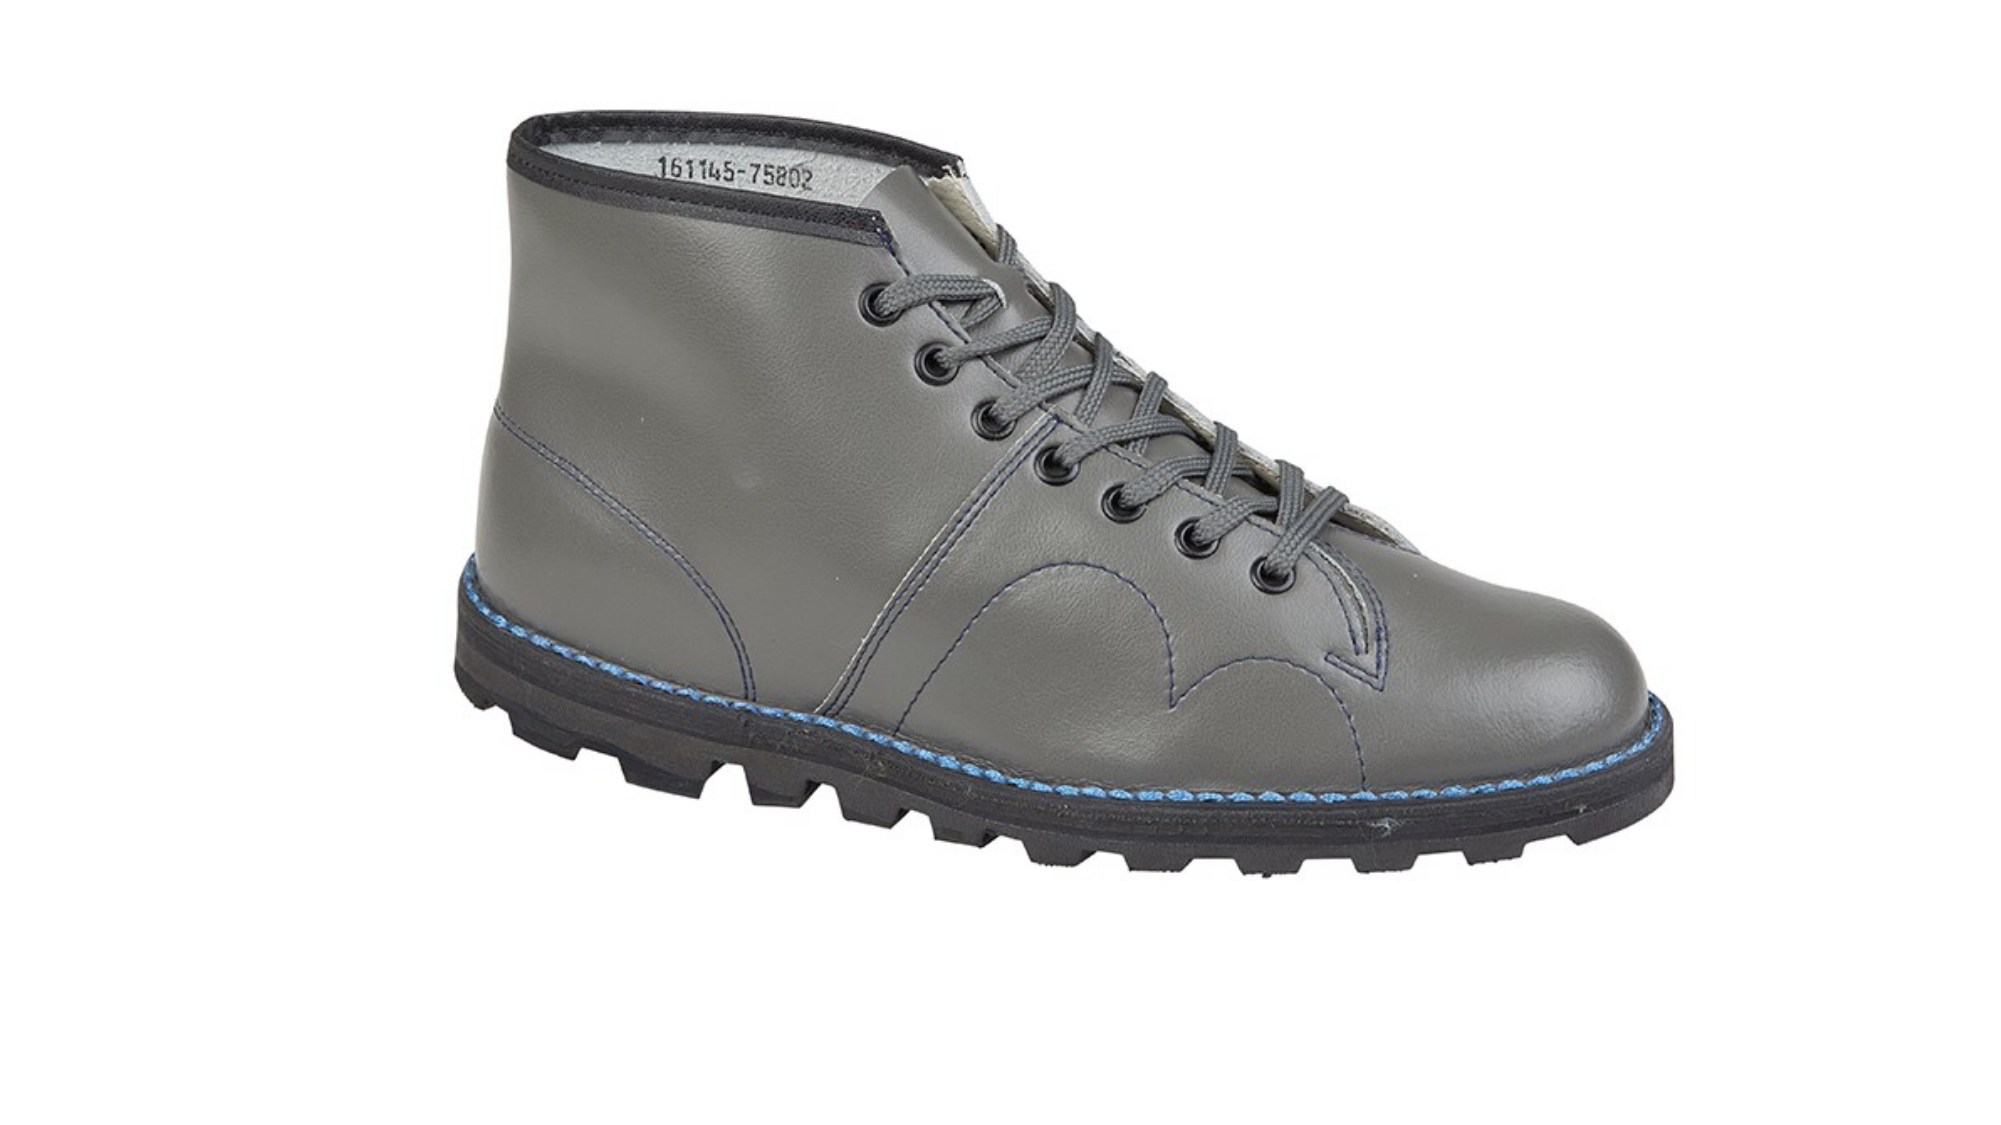 Grafters Monkey Boots Classic featuring the Original Iconic Tractor Tyre Wedge Style Sole Unit